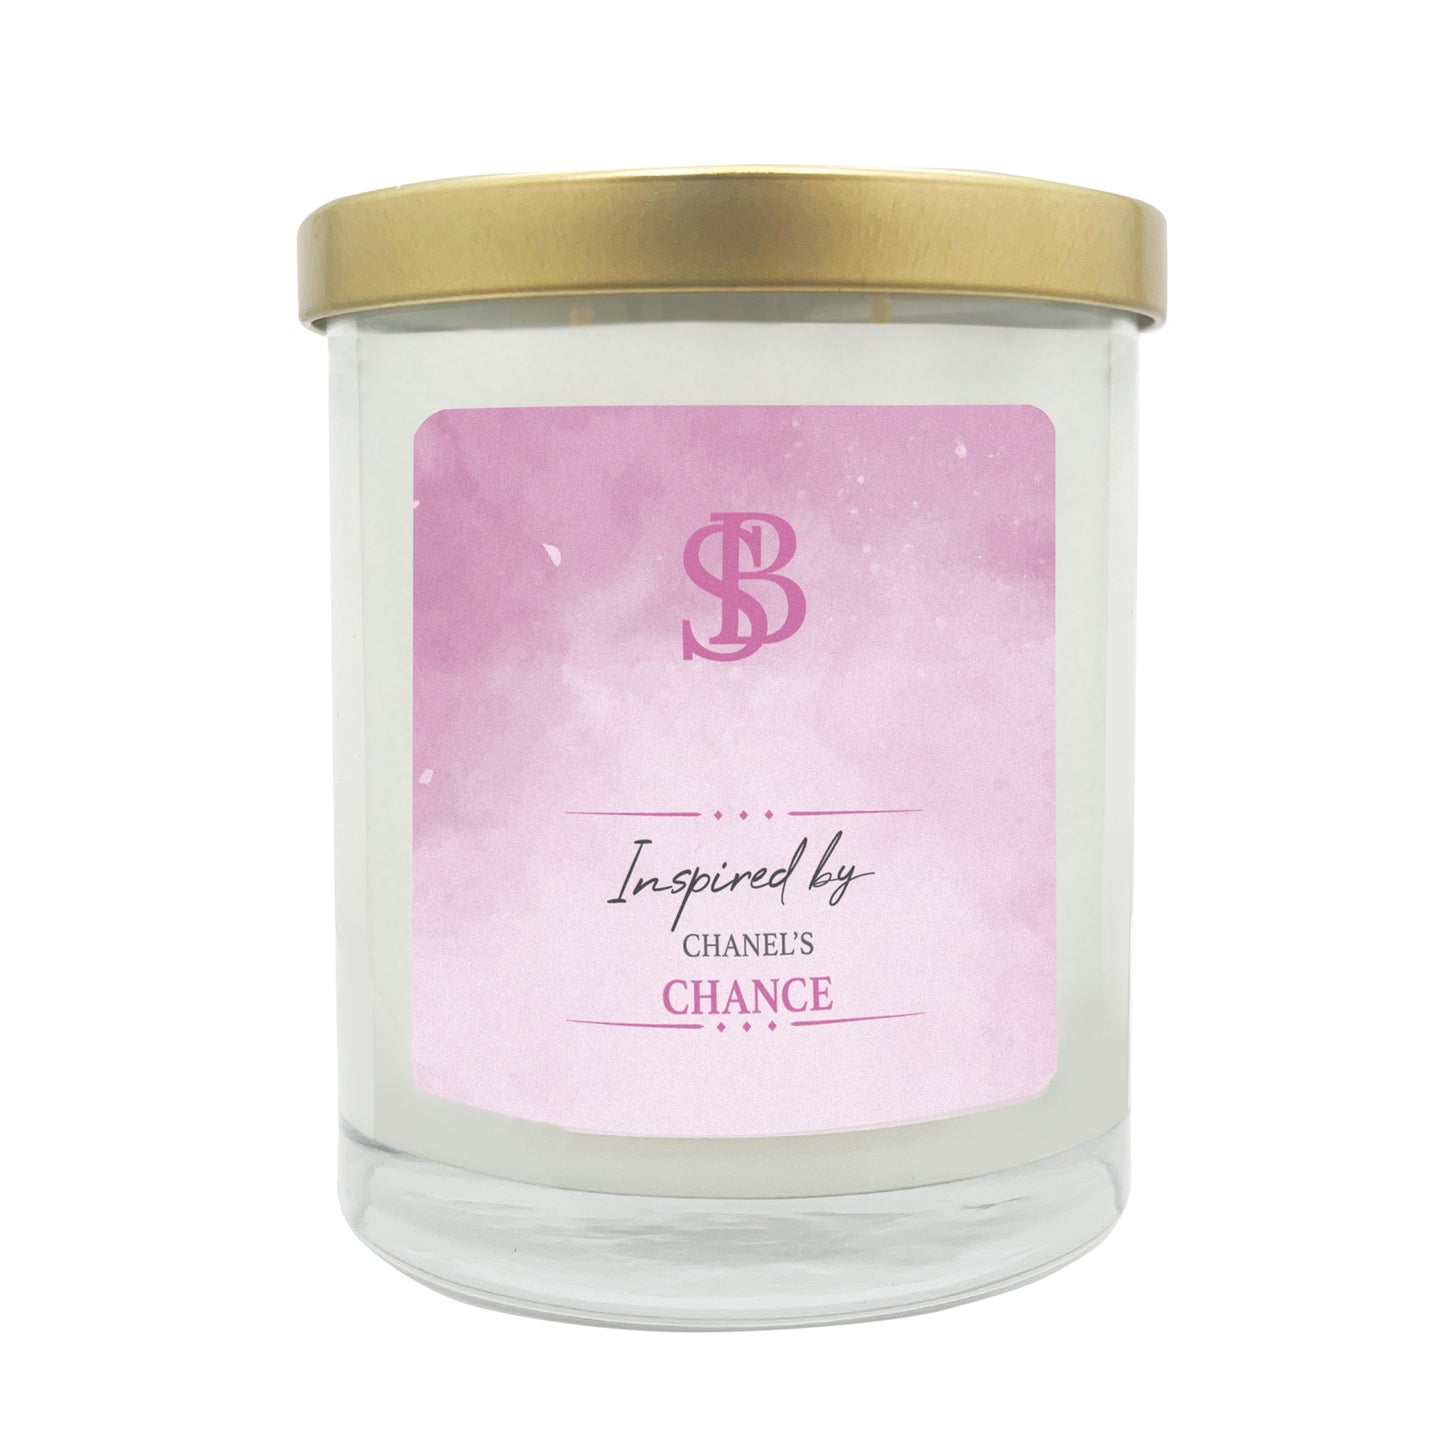 INSPIRED BY CHANEL'S CHANCE | Soy Scented Candle 11 oz